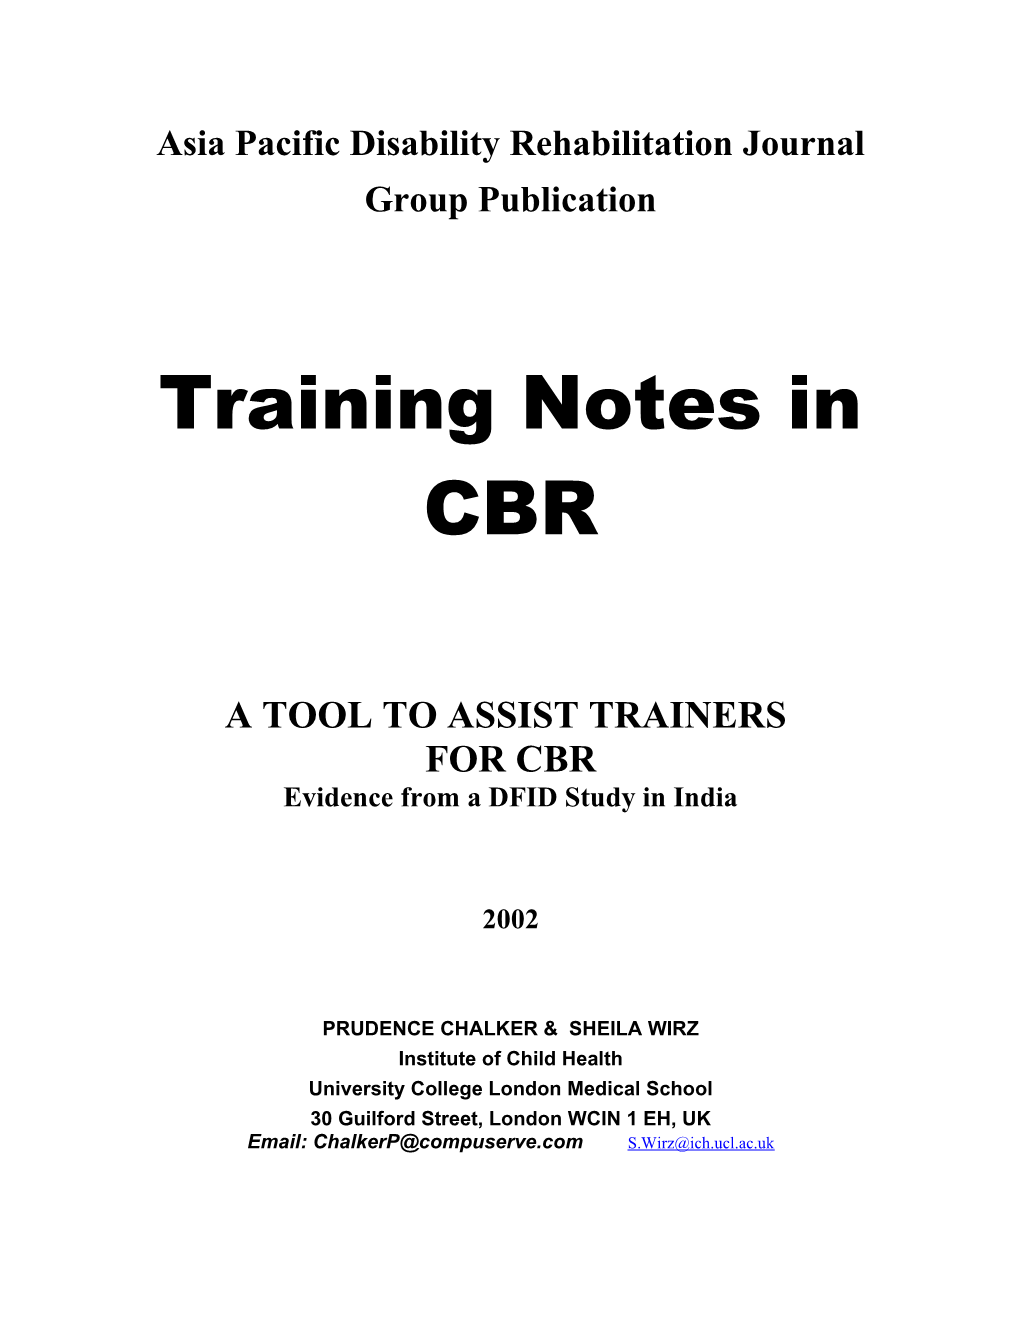 Tool to Assist Trainers Planning Cbr Training Courses